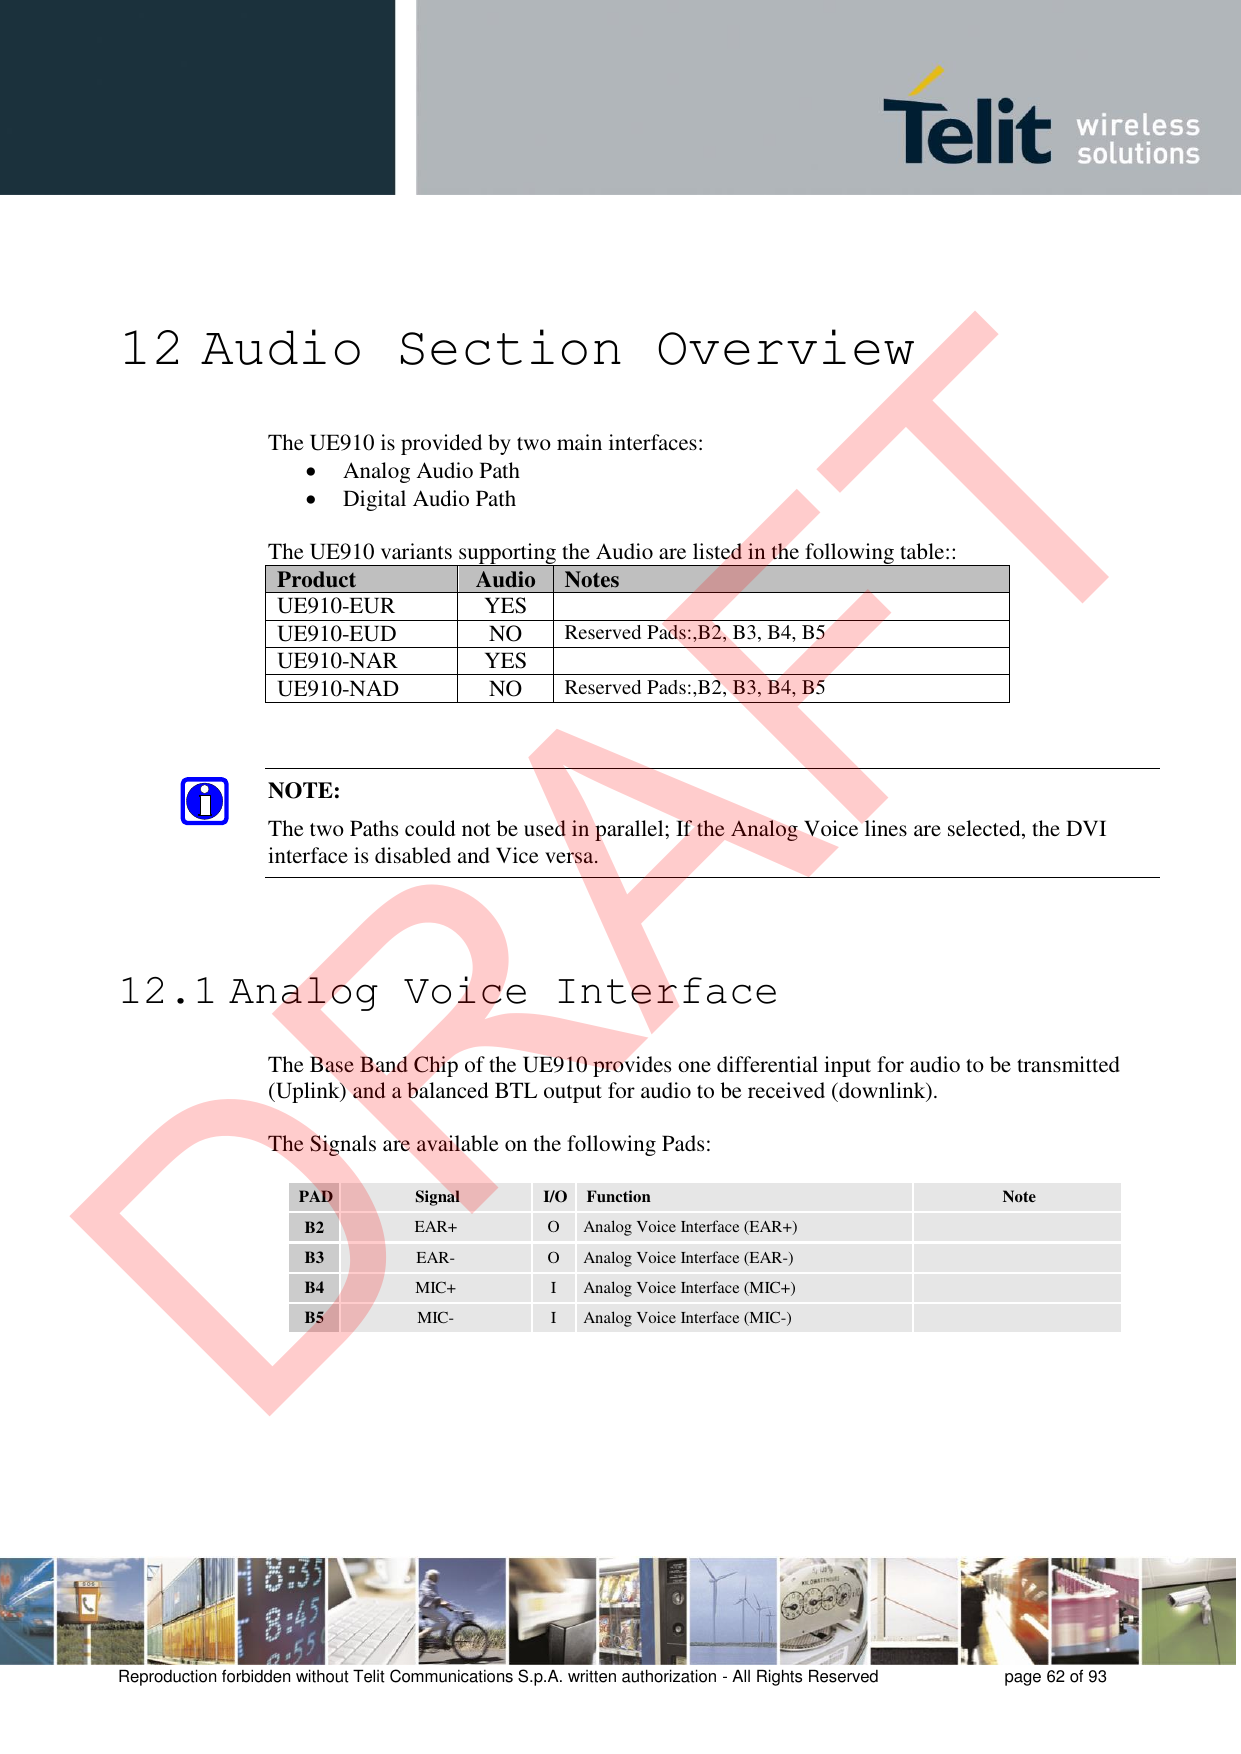 Reproduction forbidden without Telit Communications S.p.A. written authorization - All Rights Reserved  page 62 of 93 12 Audio Section Overview The UE910 is provided by two main interfaces: Analog Audio PathDigital Audio PathThe UE910 variants supporting the Audio are listed in the following table:: Product Audio Notes UE910-EUR YES UE910-EUD NO Reserved Pads:,B2, B3, B4, B5 UE910-NAR YES UE910-NAD NO Reserved Pads:,B2, B3, B4, B5 NOTE: The two Paths could not be used in parallel; If the Analog Voice lines are selected, the DVI interface is disabled and Vice versa. 12.1 Analog Voice Interface The Base Band Chip of the UE910 provides one differential input for audio to be transmitted (Uplink) and a balanced BTL output for audio to be received (downlink). The Signals are available on the following Pads: PAD Signal I/O Function Note B2 EAR+ O Analog Voice Interface (EAR+) B3 EAR- O Analog Voice Interface (EAR-) B4 MIC+ I Analog Voice Interface (MIC+) B5 MIC- I Analog Voice Interface (MIC-) DRAFT